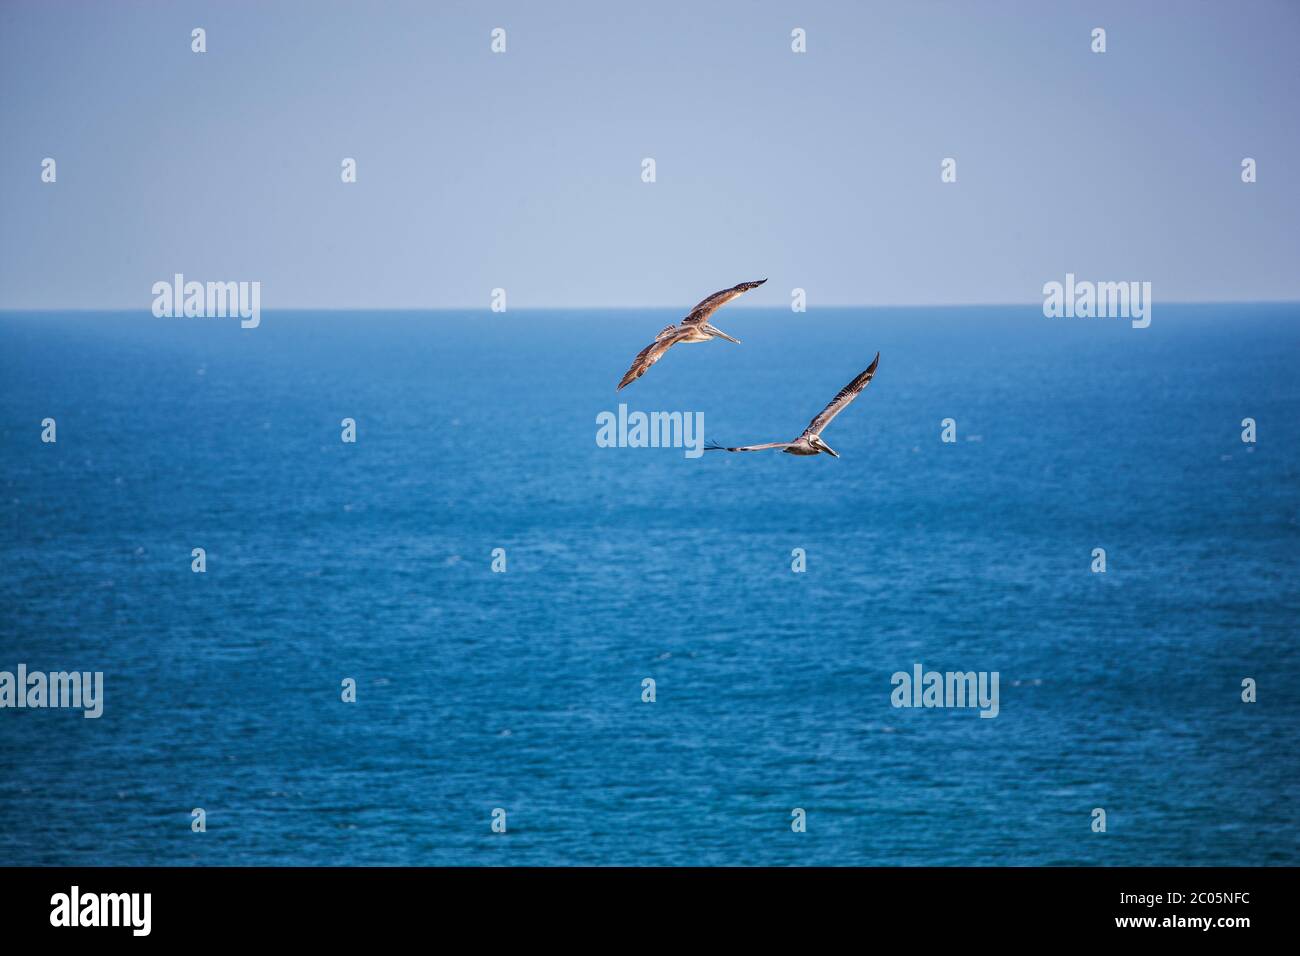 Two brown pelicans are shown in flights soaring over the Gulf of Mexico with wings spread agains a cloudless blue sky and blue water Stock Photo